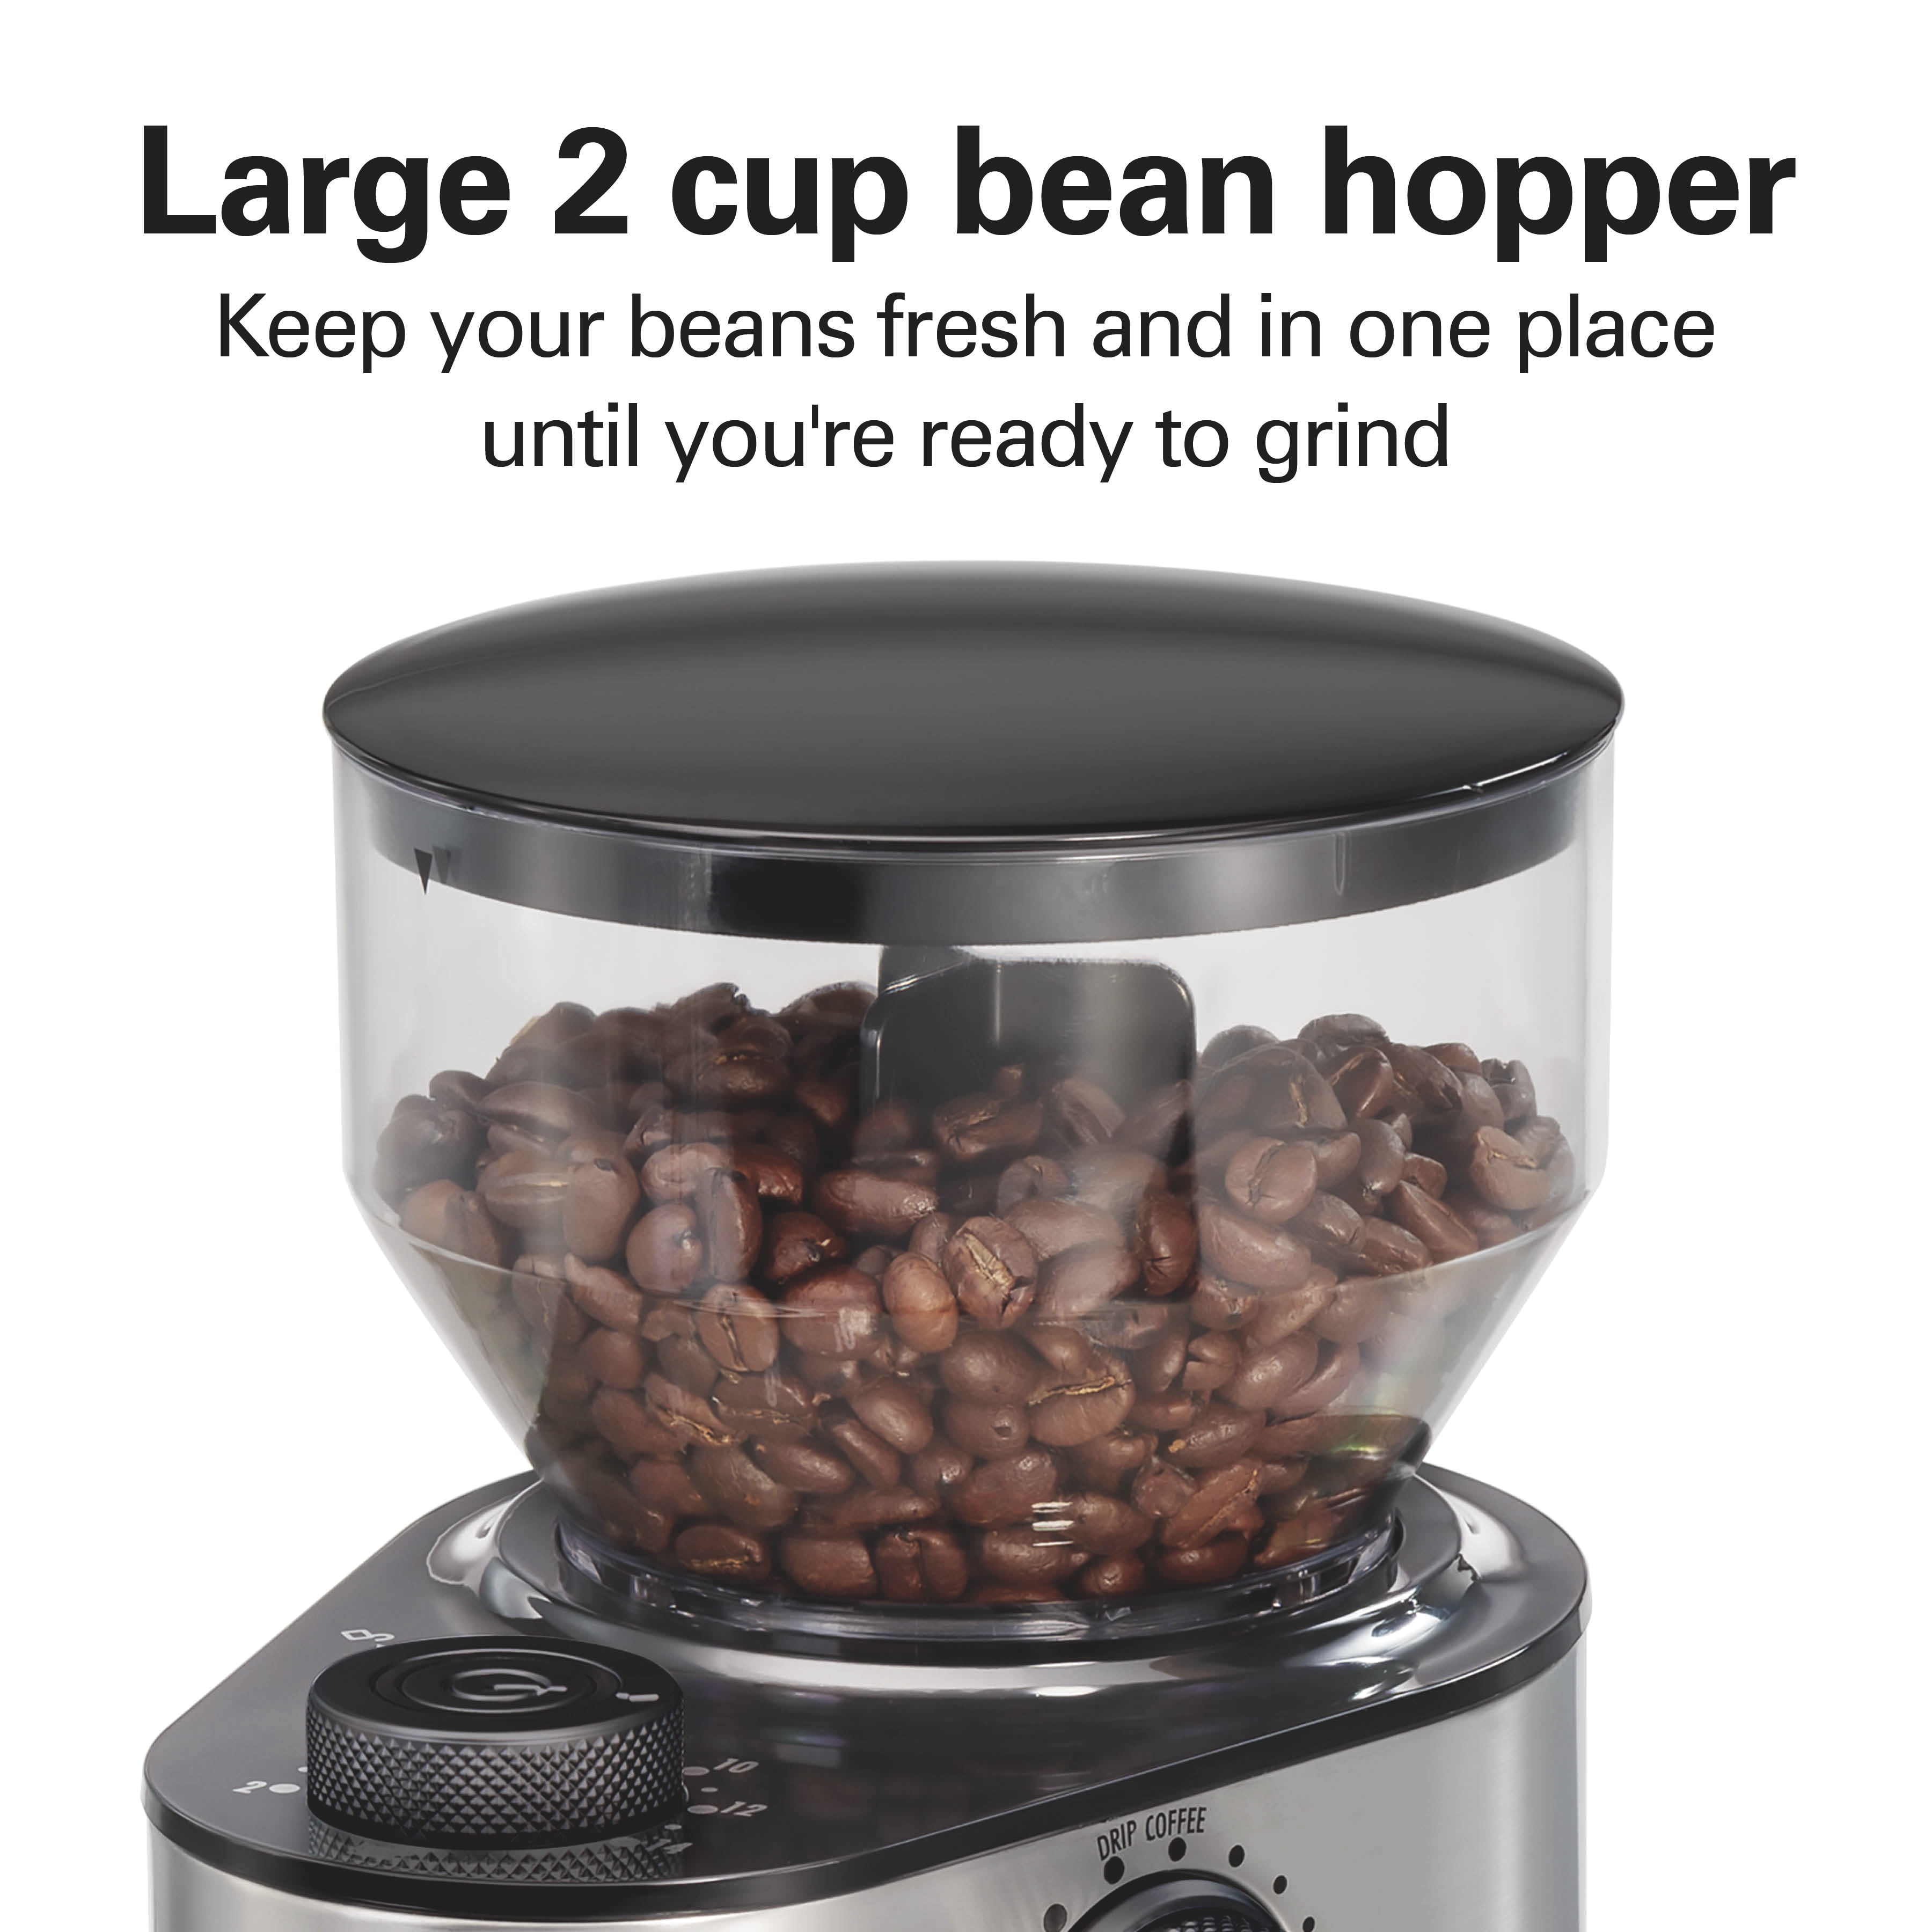 Hamilton Beach Coffee Grinder Removable Grinding Chamber - Office Depot